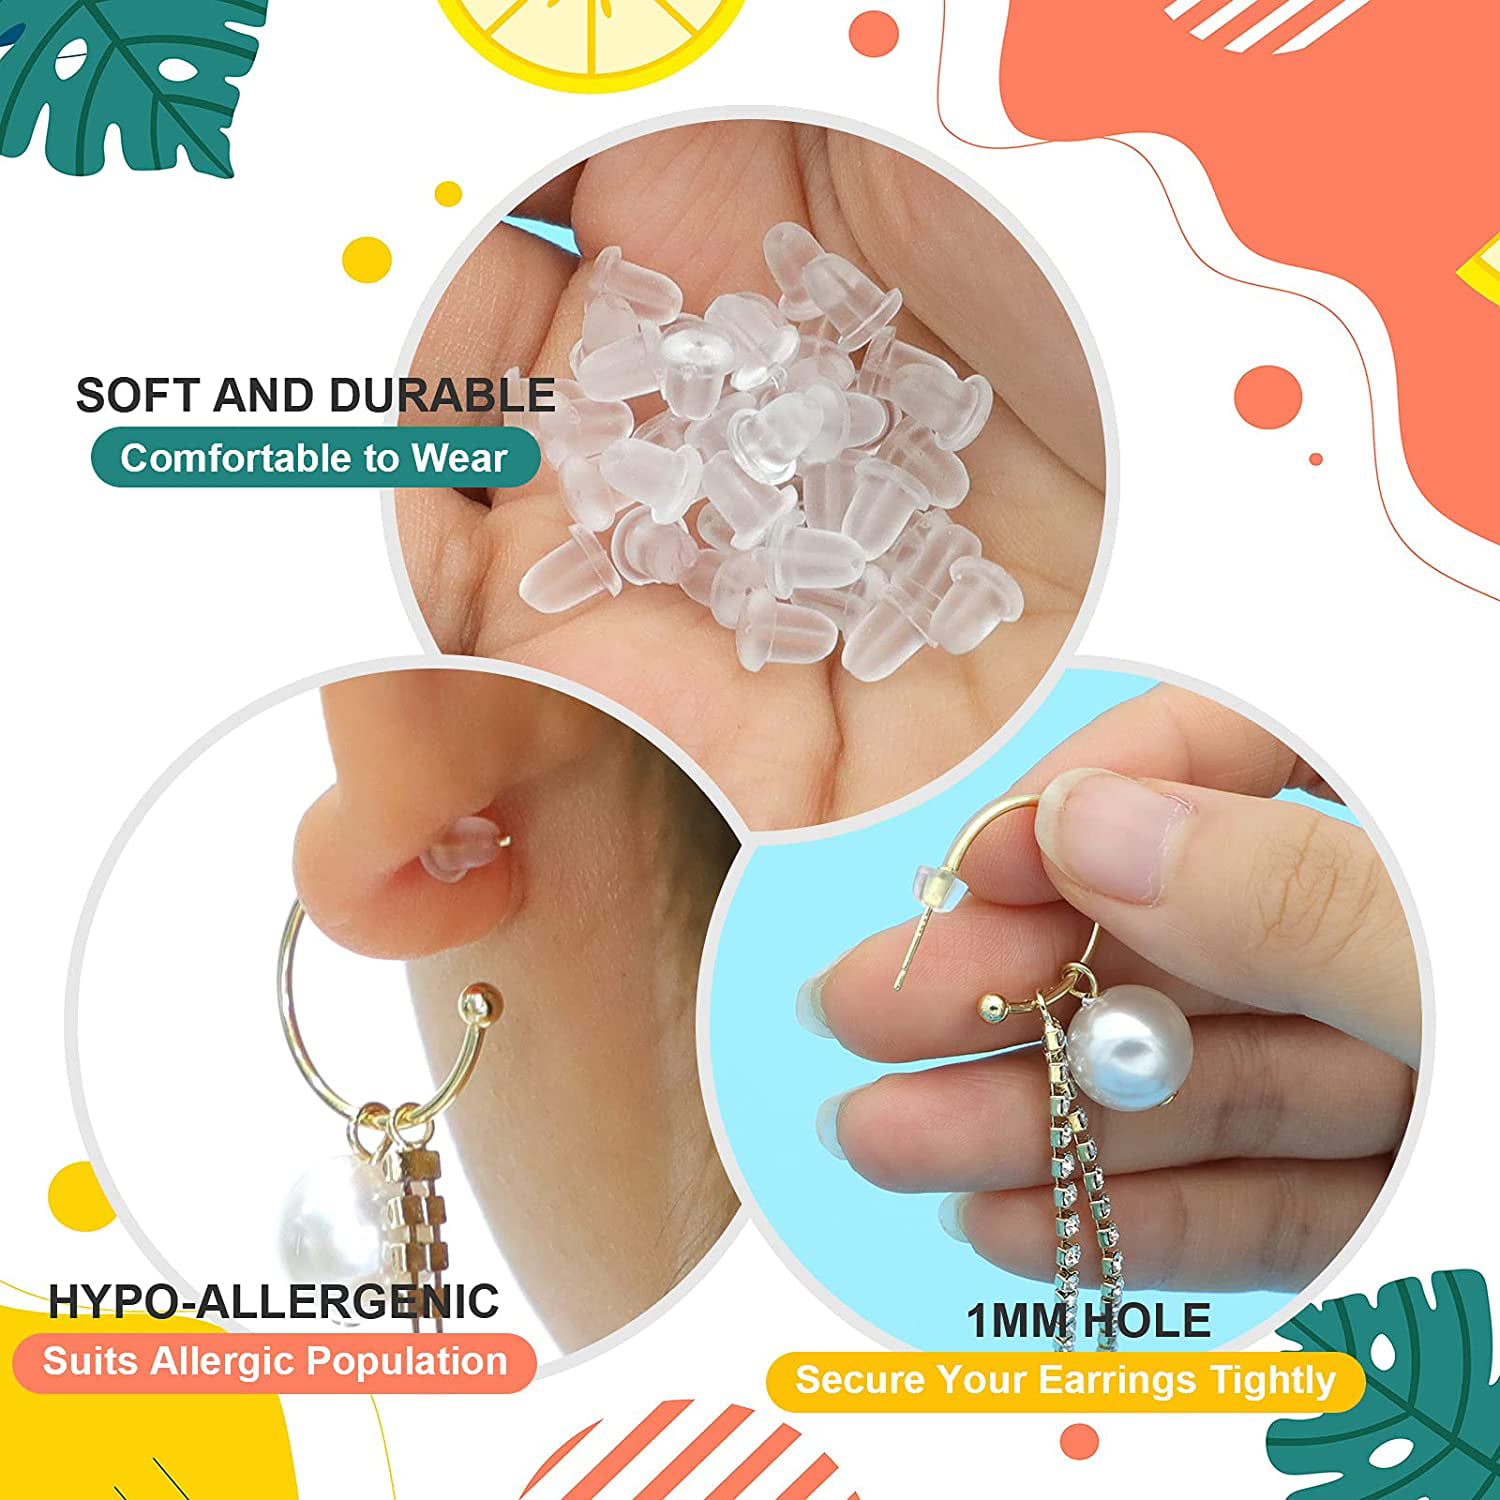 Silicone Earring Backs, 2000Pcs Soft Earring Stoppers, Clear Earring Backing  Replacement for Stud Post Fishhook Earrings, Hypoallergenic 